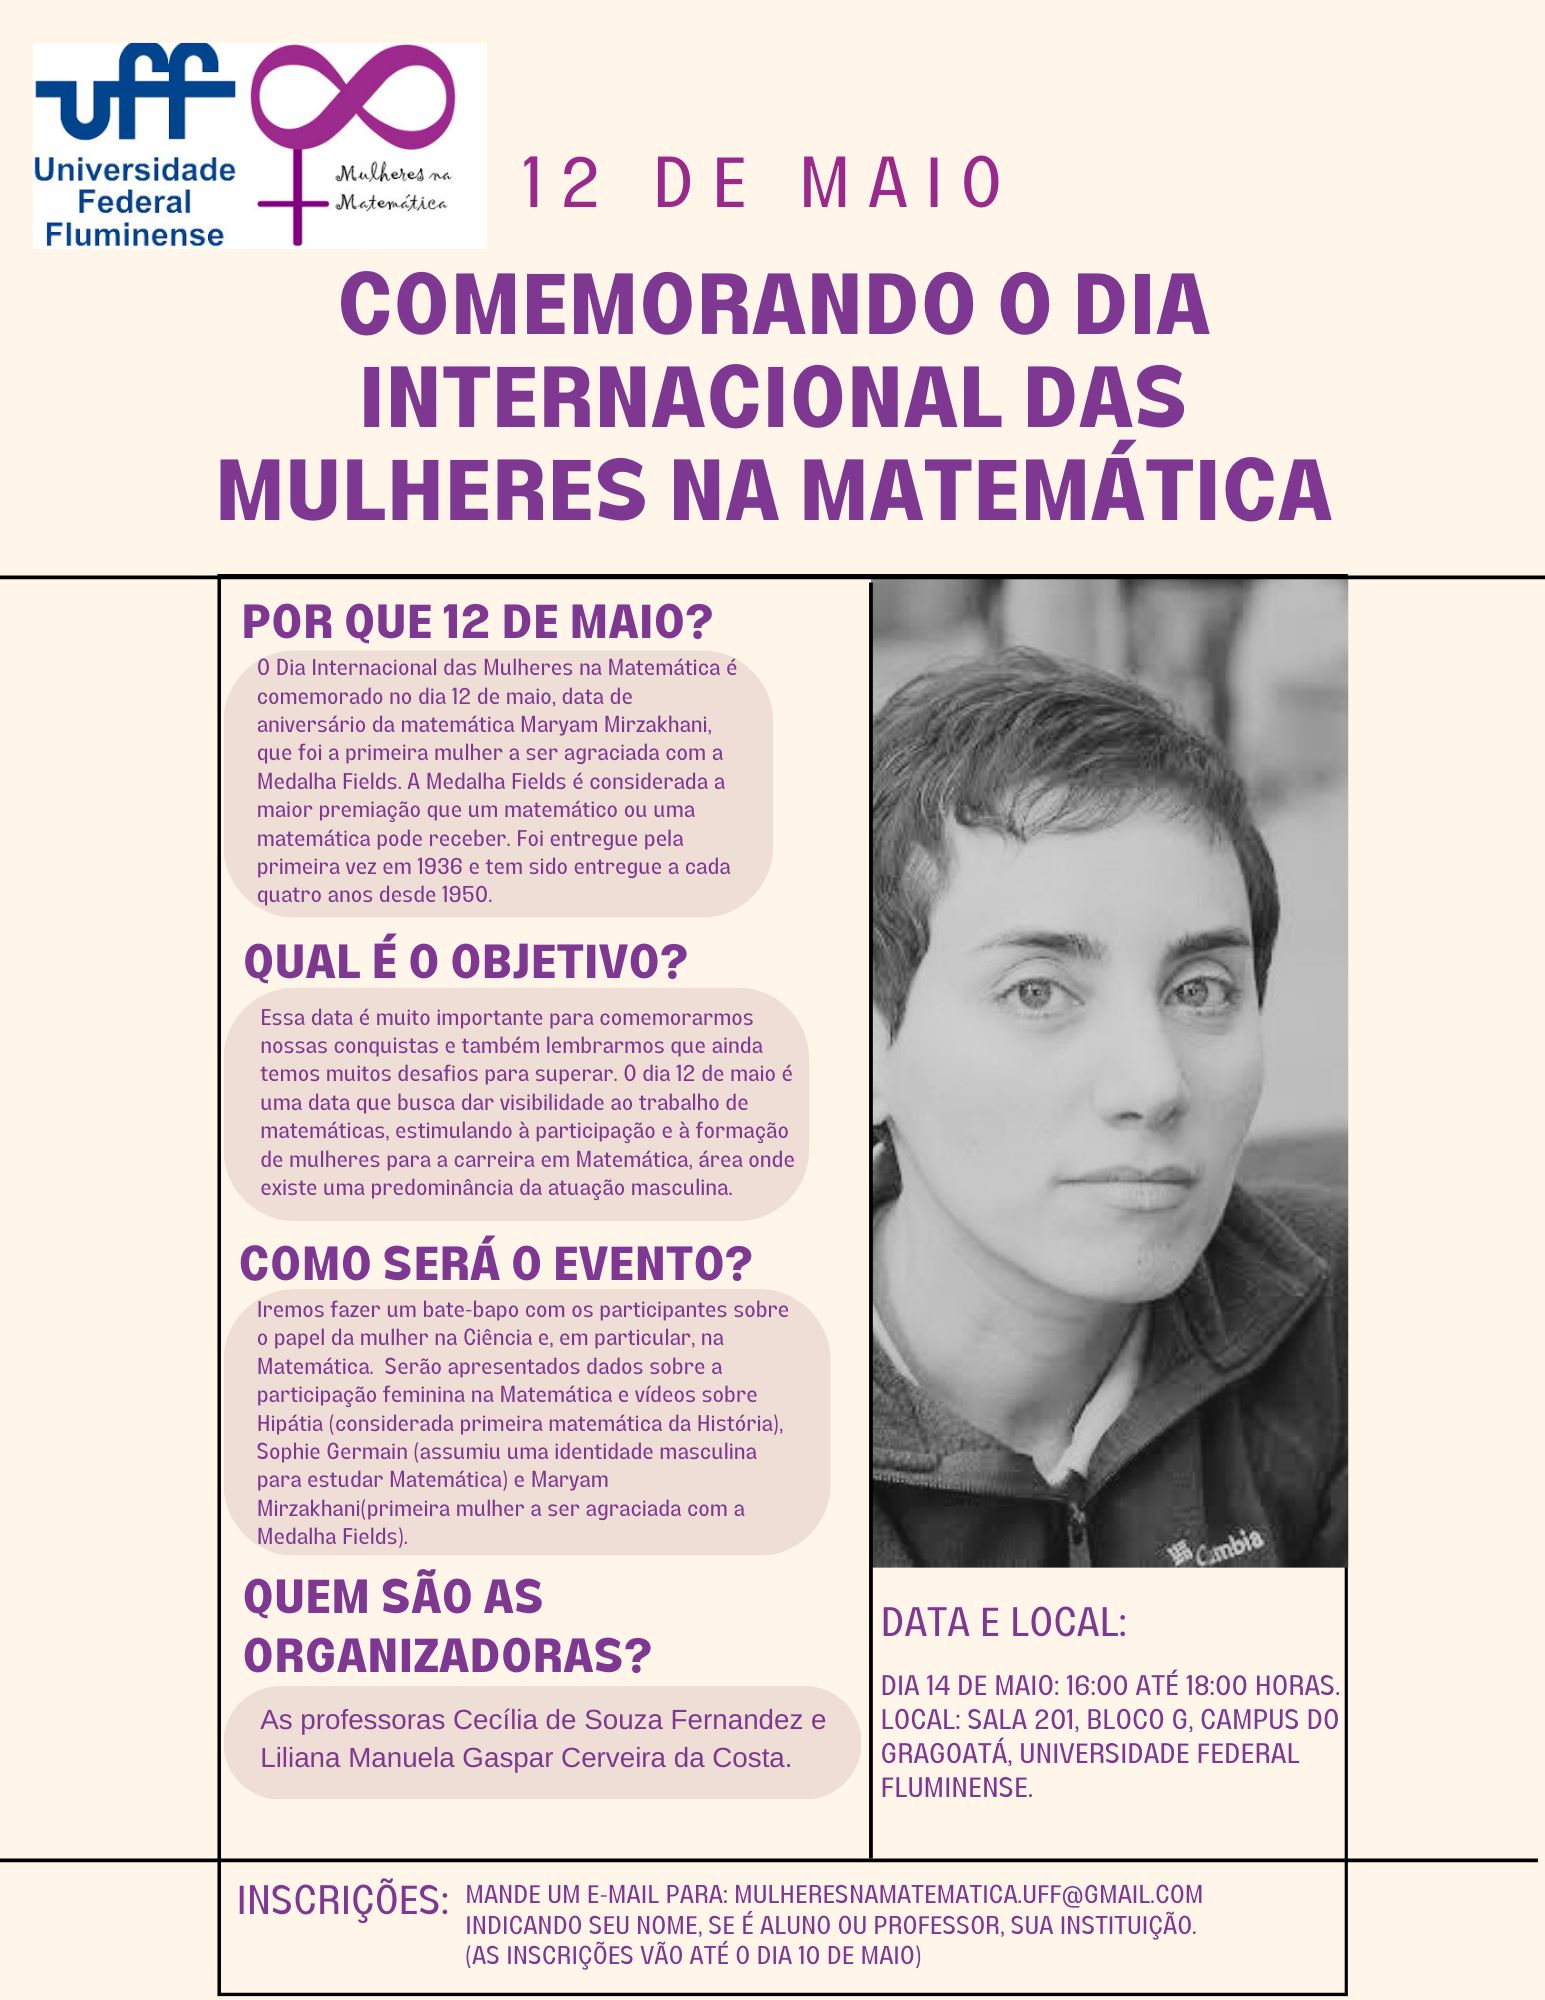 Text with the descrition of the event and a picture of Maryam Mirzakhani